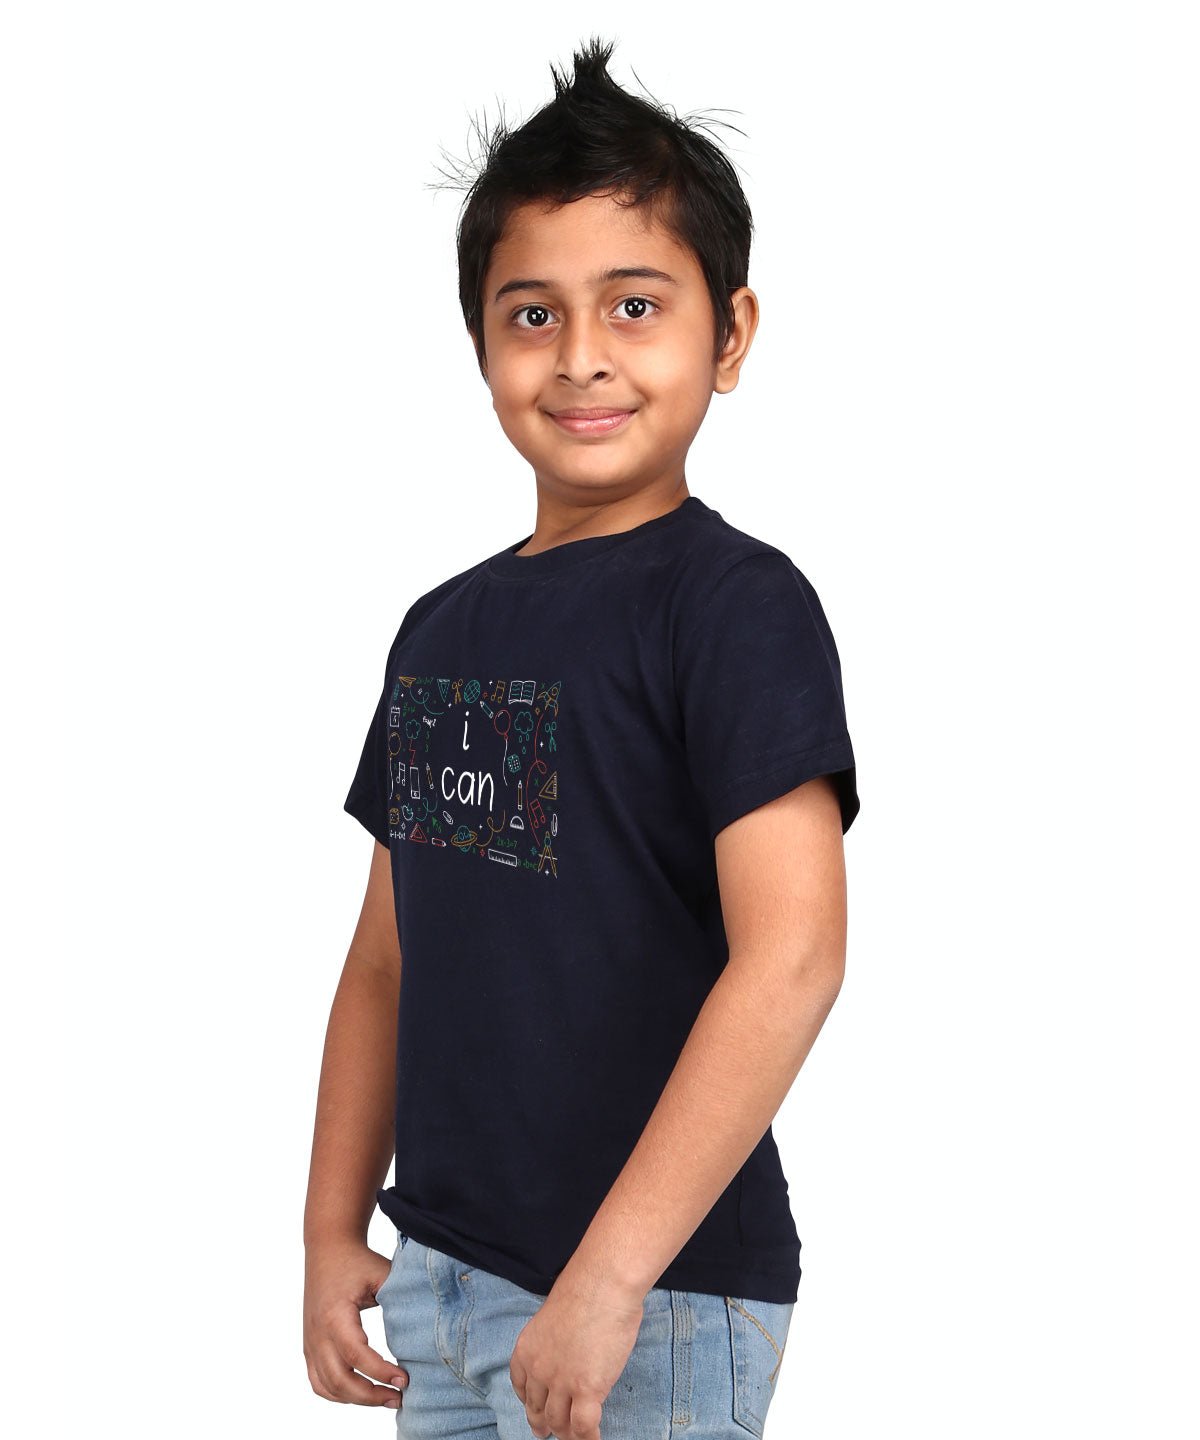 I Can - Premium Round Neck Cotton Tees for Juniors - Navy Blue